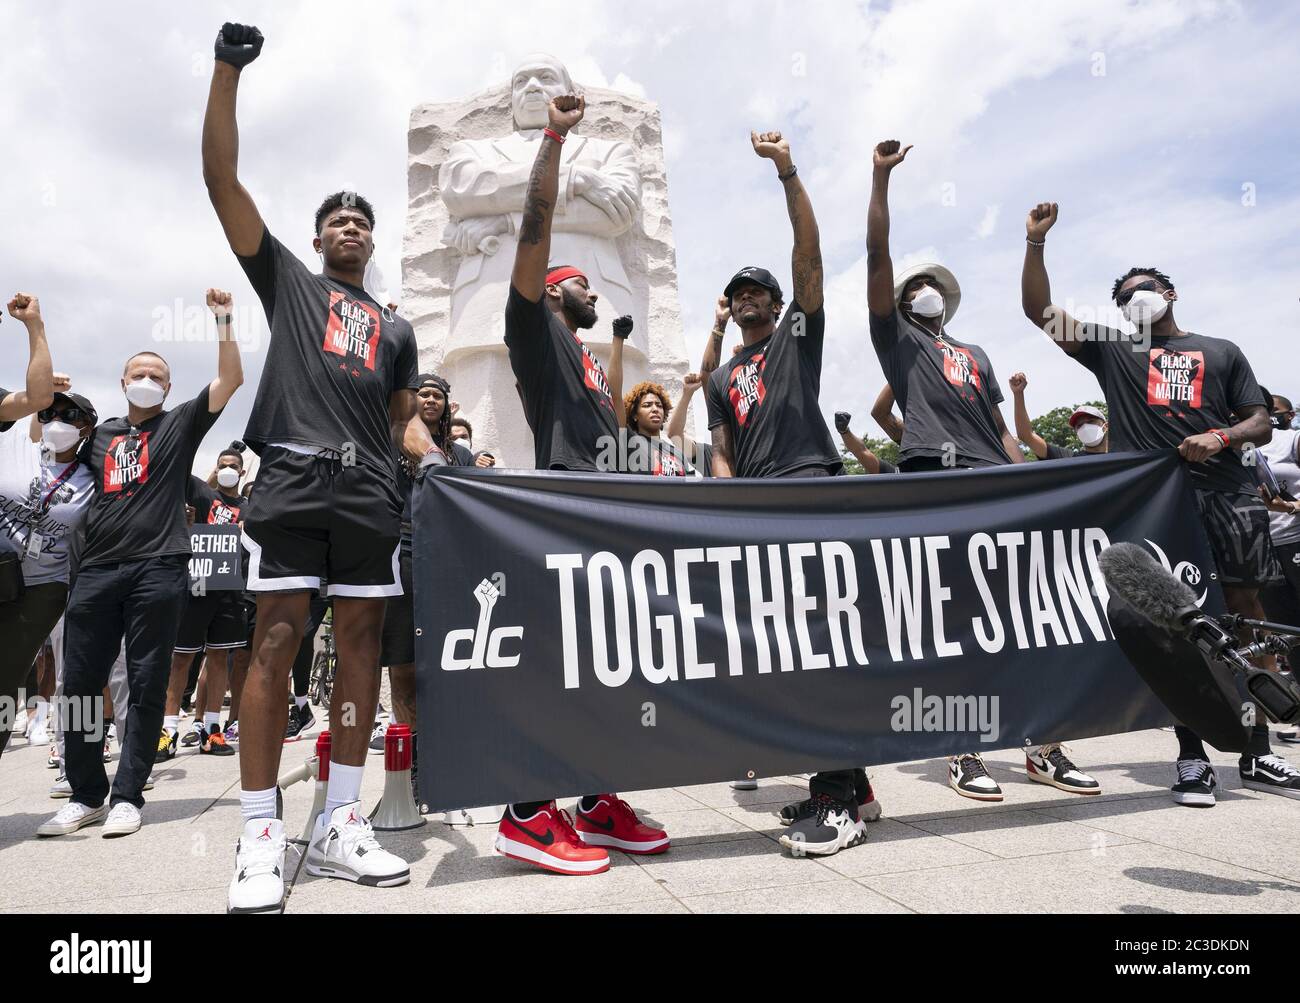 Washington, United States. 19th June, 2020. Members of the Washington Wizards including Bradley Beal and John Wall participate in a Juneteenth rally at the Martin Luther King Jr. Memorial on Friday, June 19, 2020 in Washington, DC. Juneteenth, or June 19th, marks the date of the end of slavery in the United States. Photo by Kevin Dietsch/UPI Credit: UPI/Alamy Live News Stock Photo